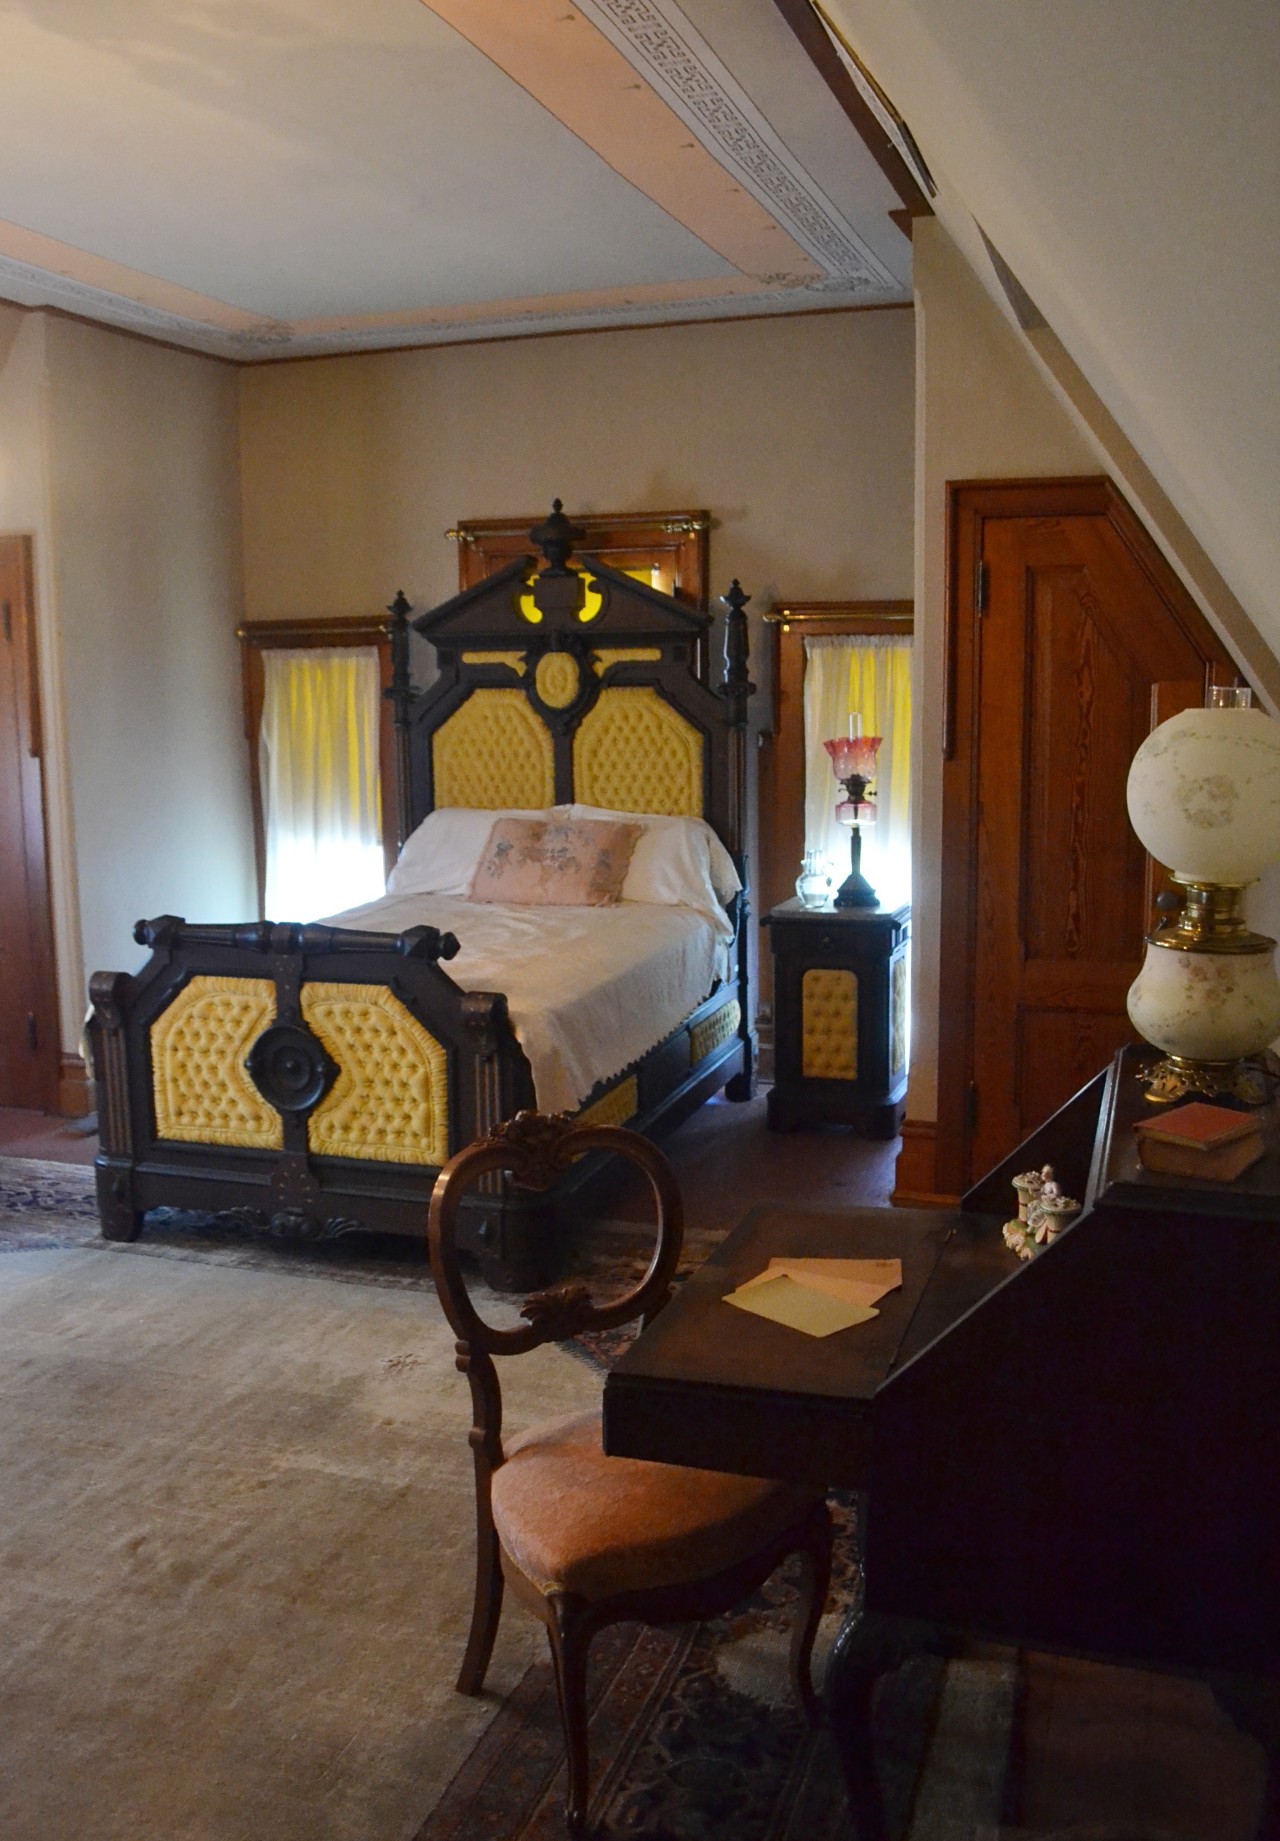 Another guest room in Twain's home